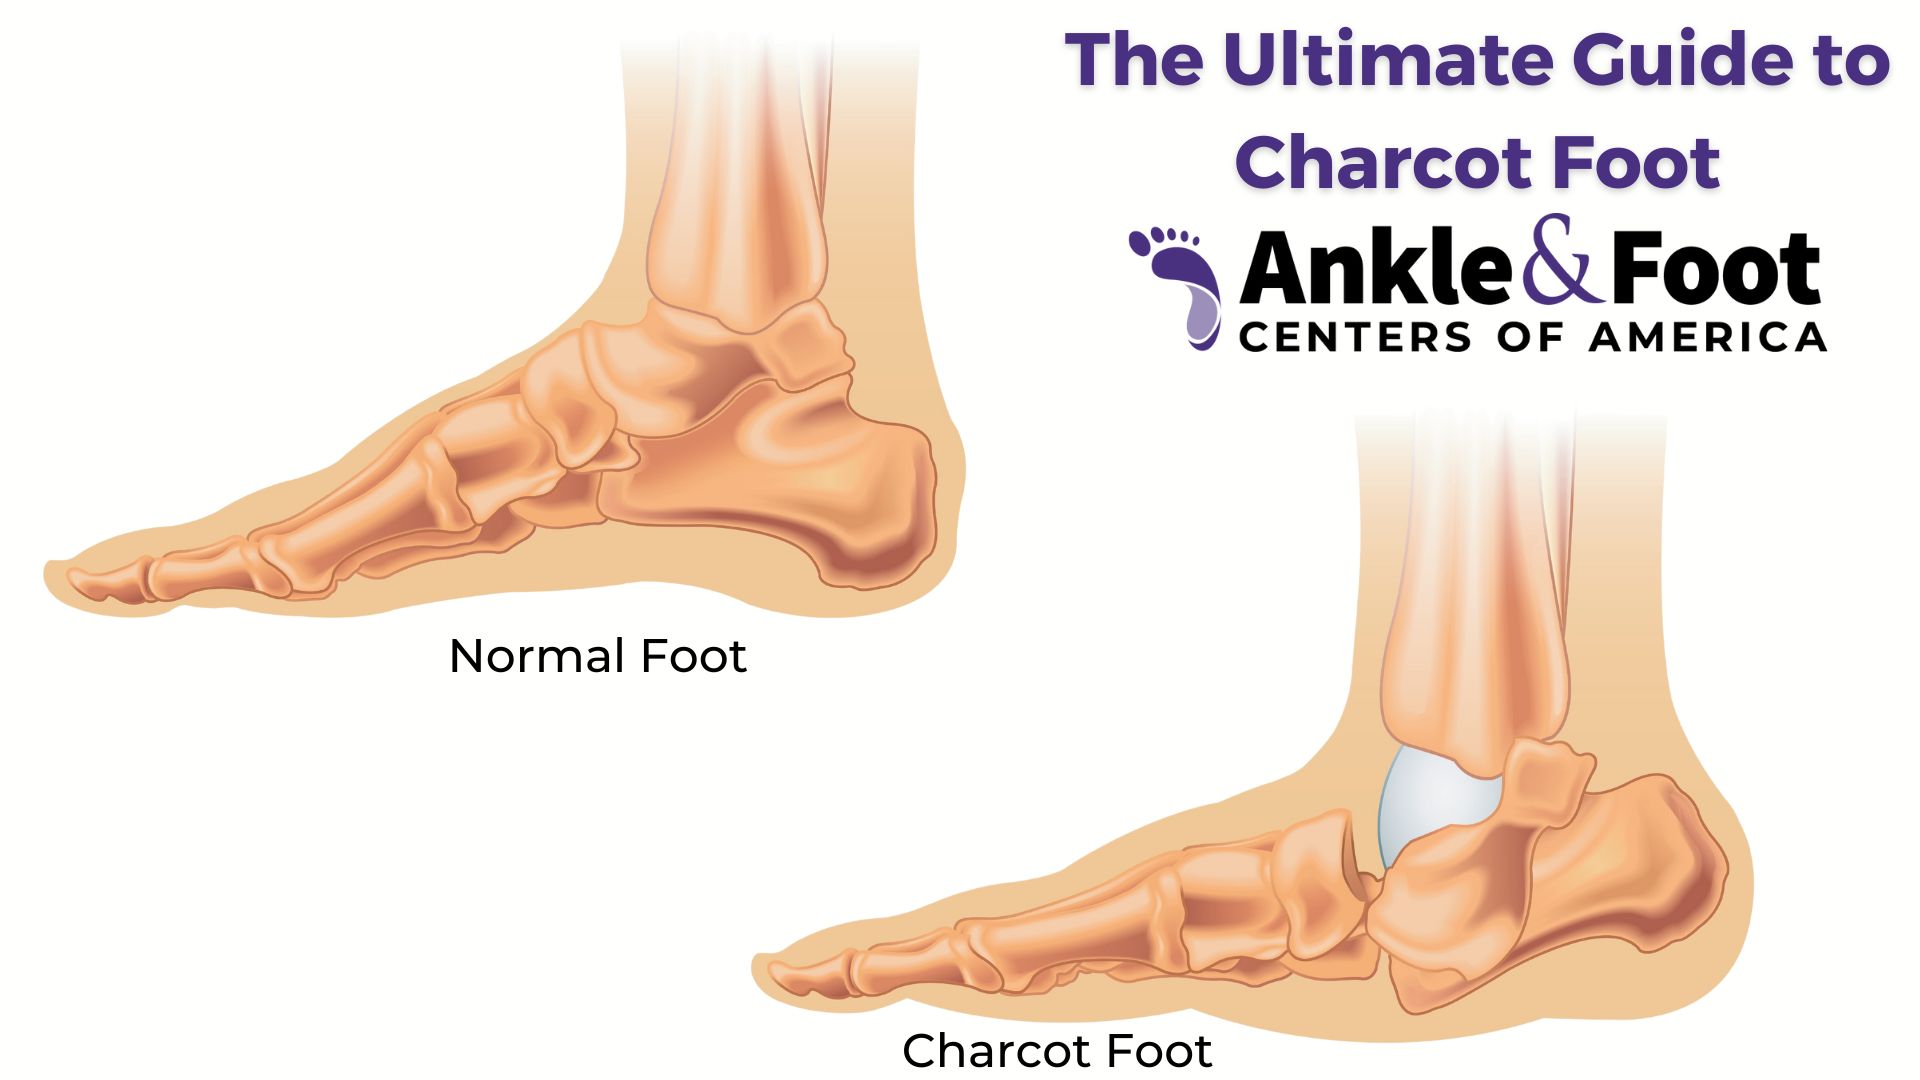 The Ultimate Guide to Charcot Foot